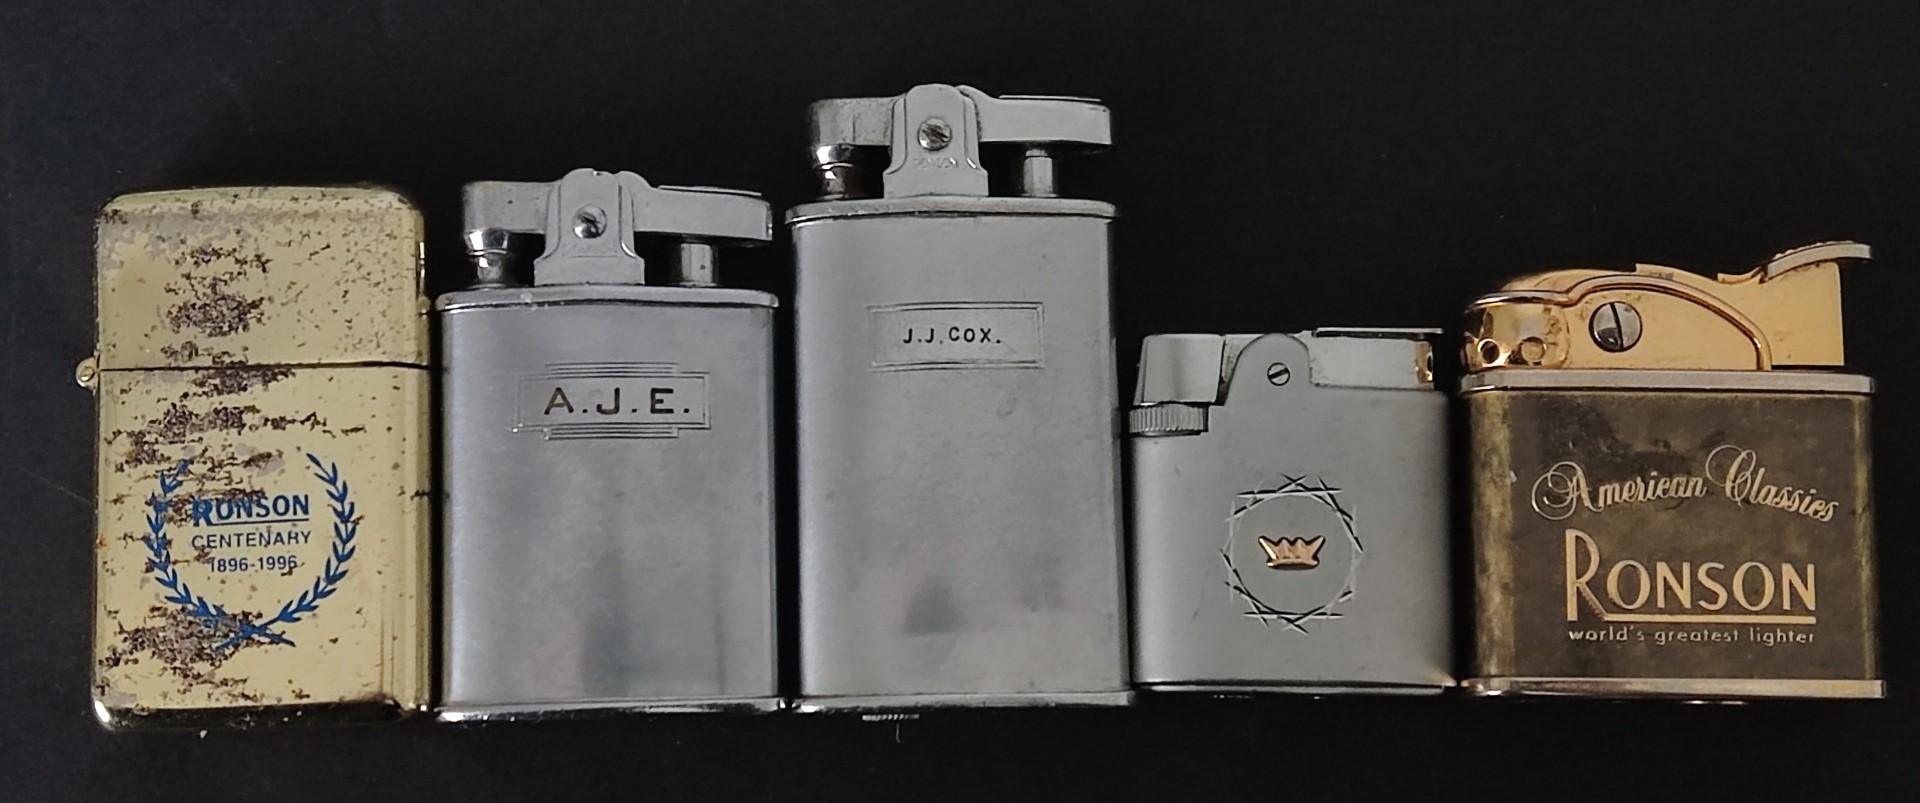 A collection of five Ronson lighters.